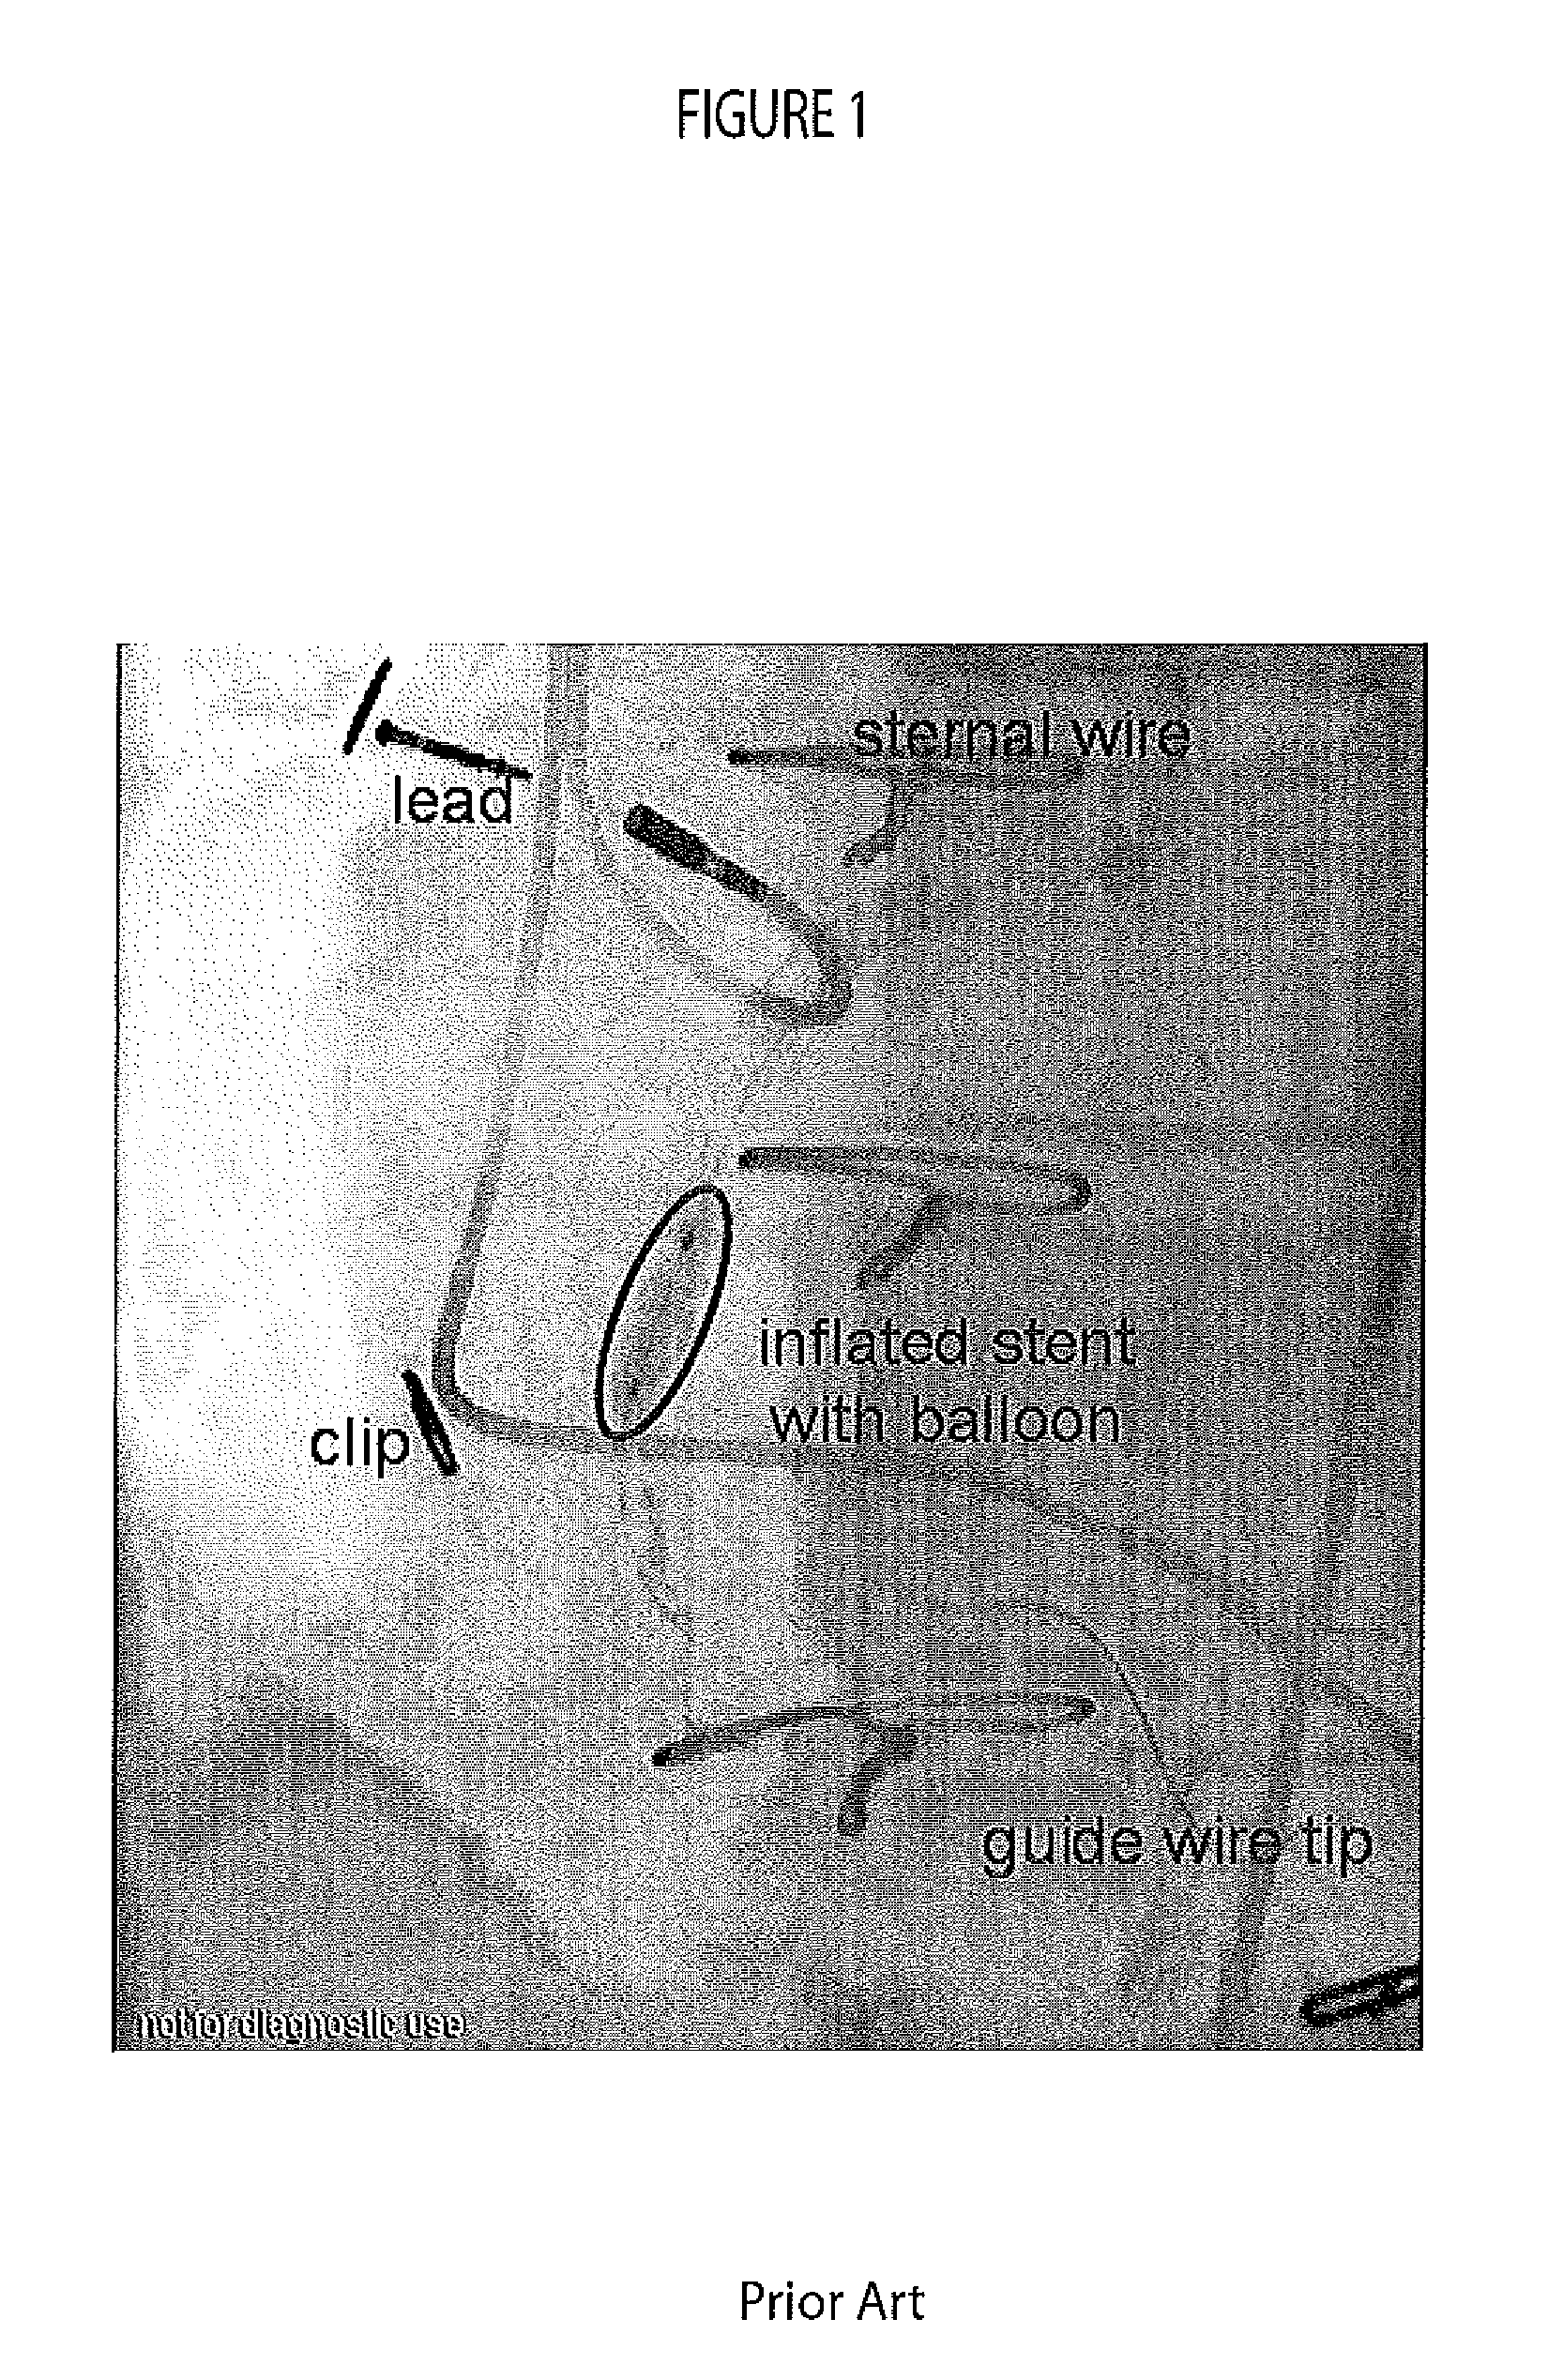 System for detecting catheterization devices